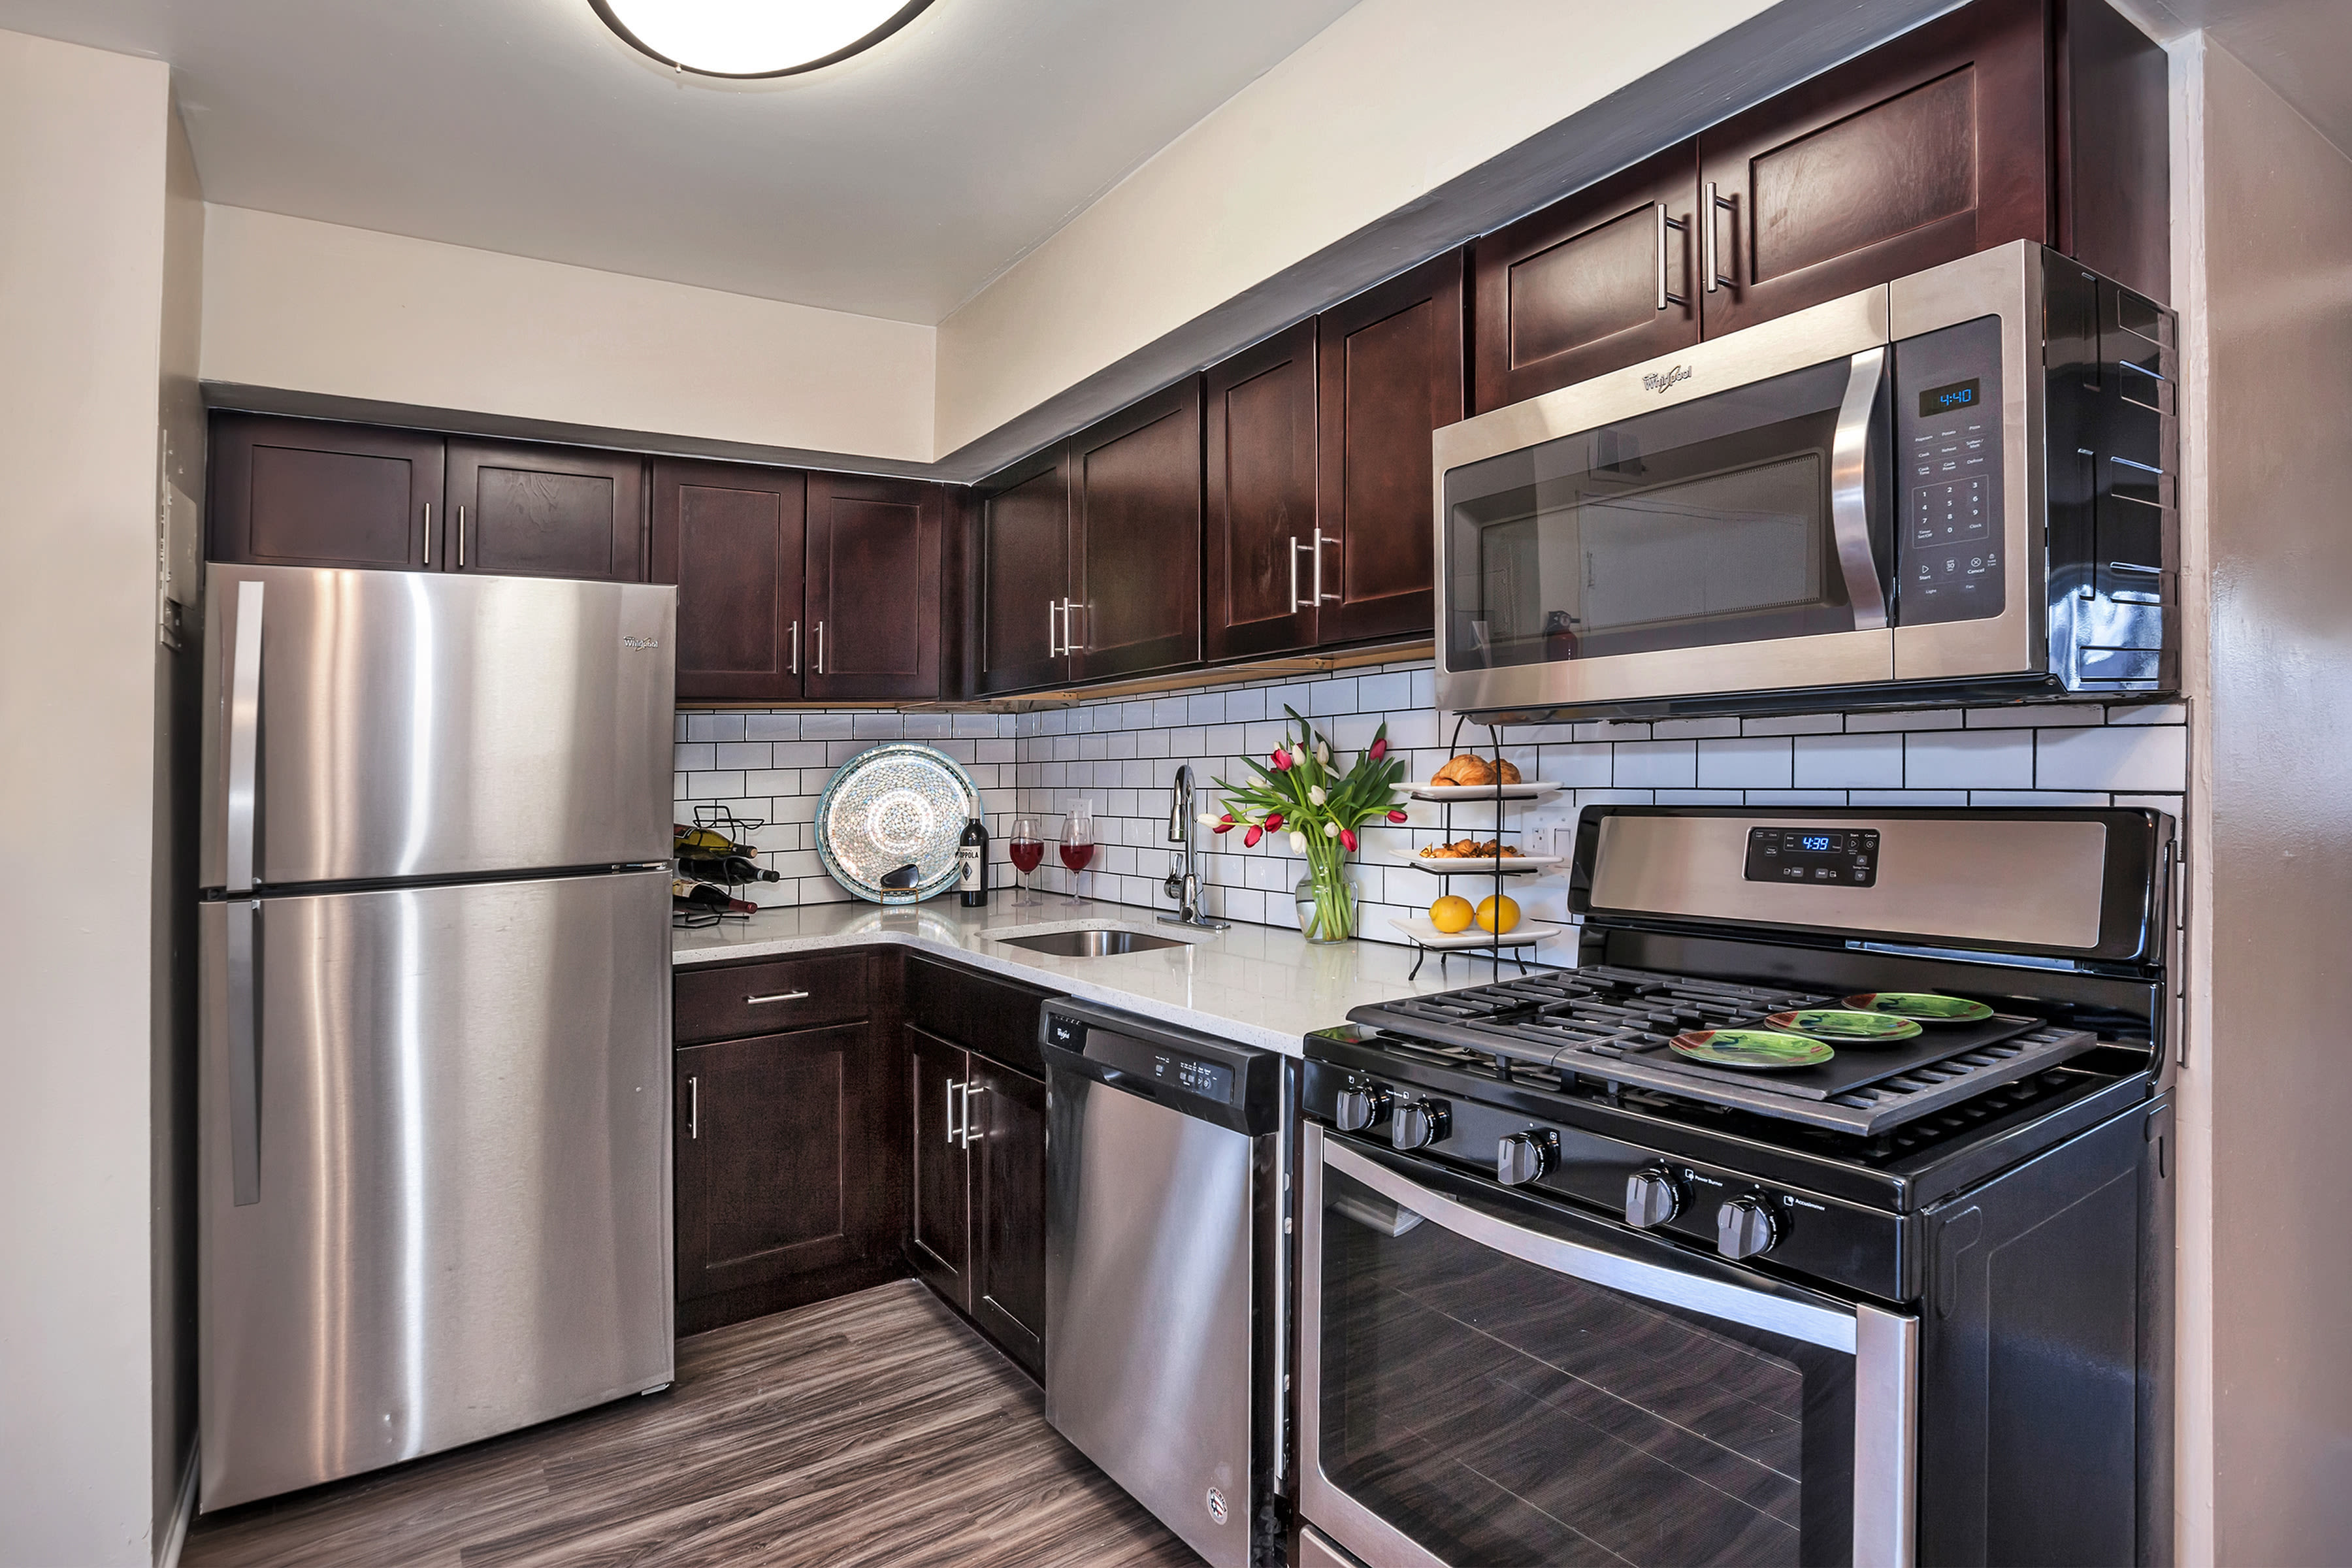 Kitchen with white appliances, cabinets and countertops at Franklin Commons, Bensalem, Pennsylvania